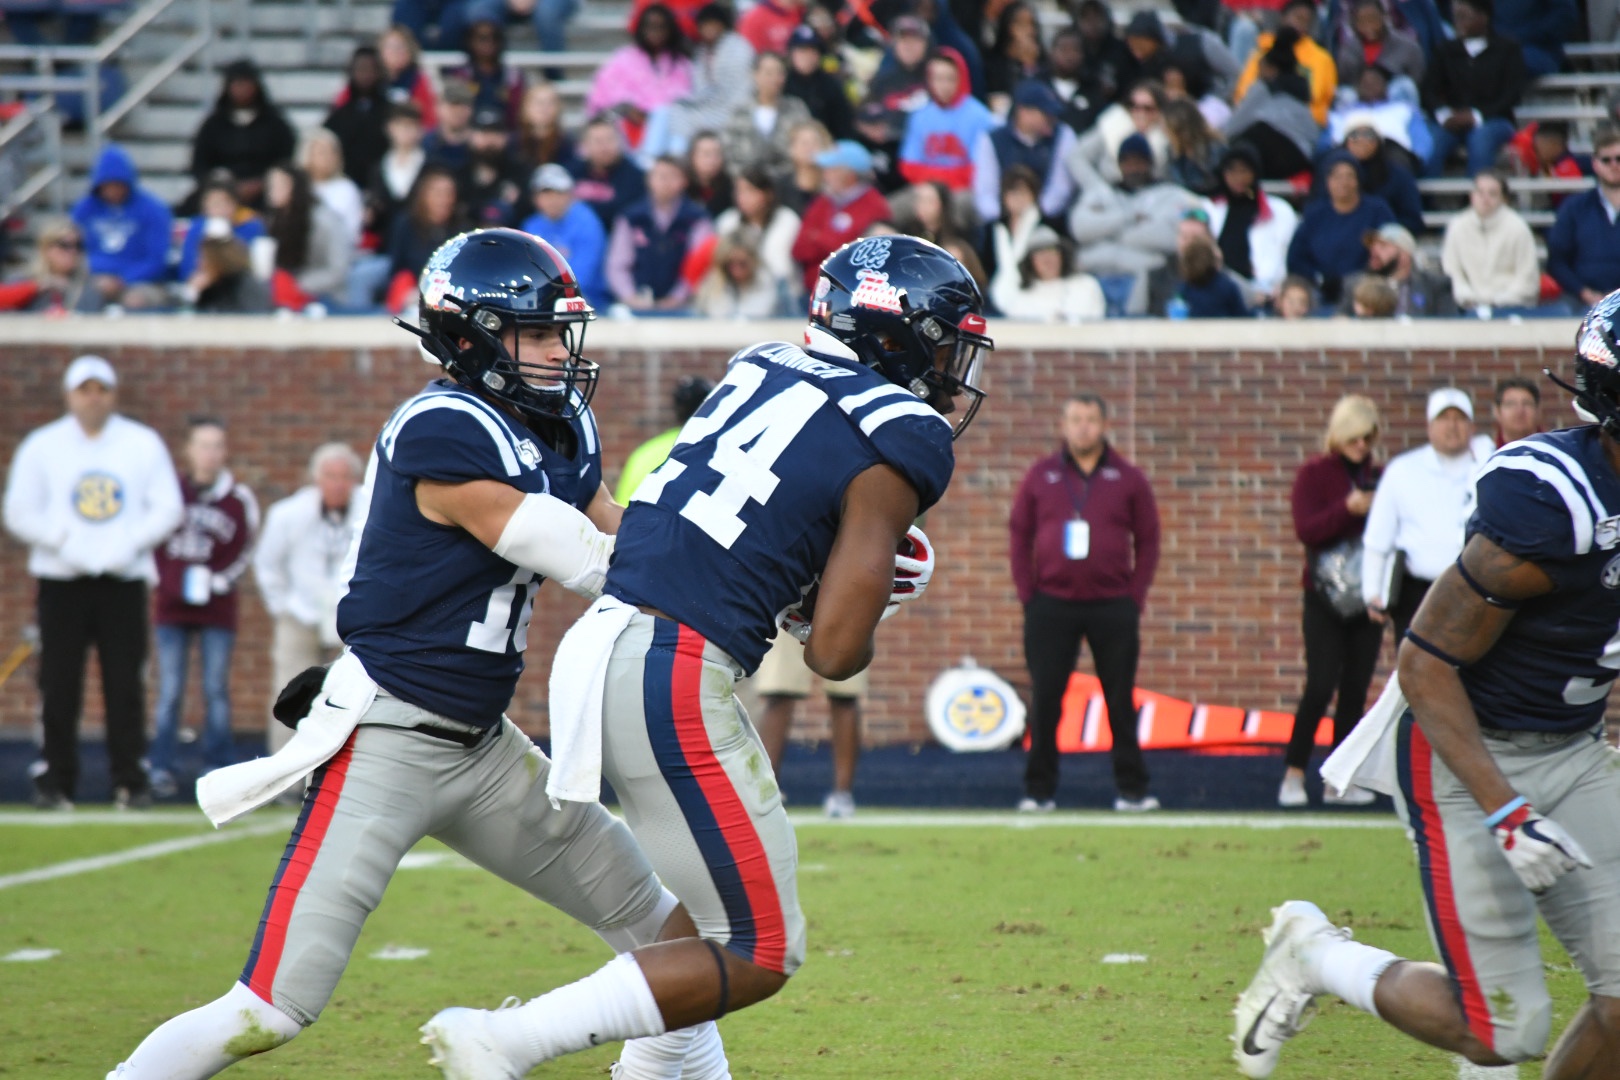 Keys to Victory for Ole Miss versus Florida